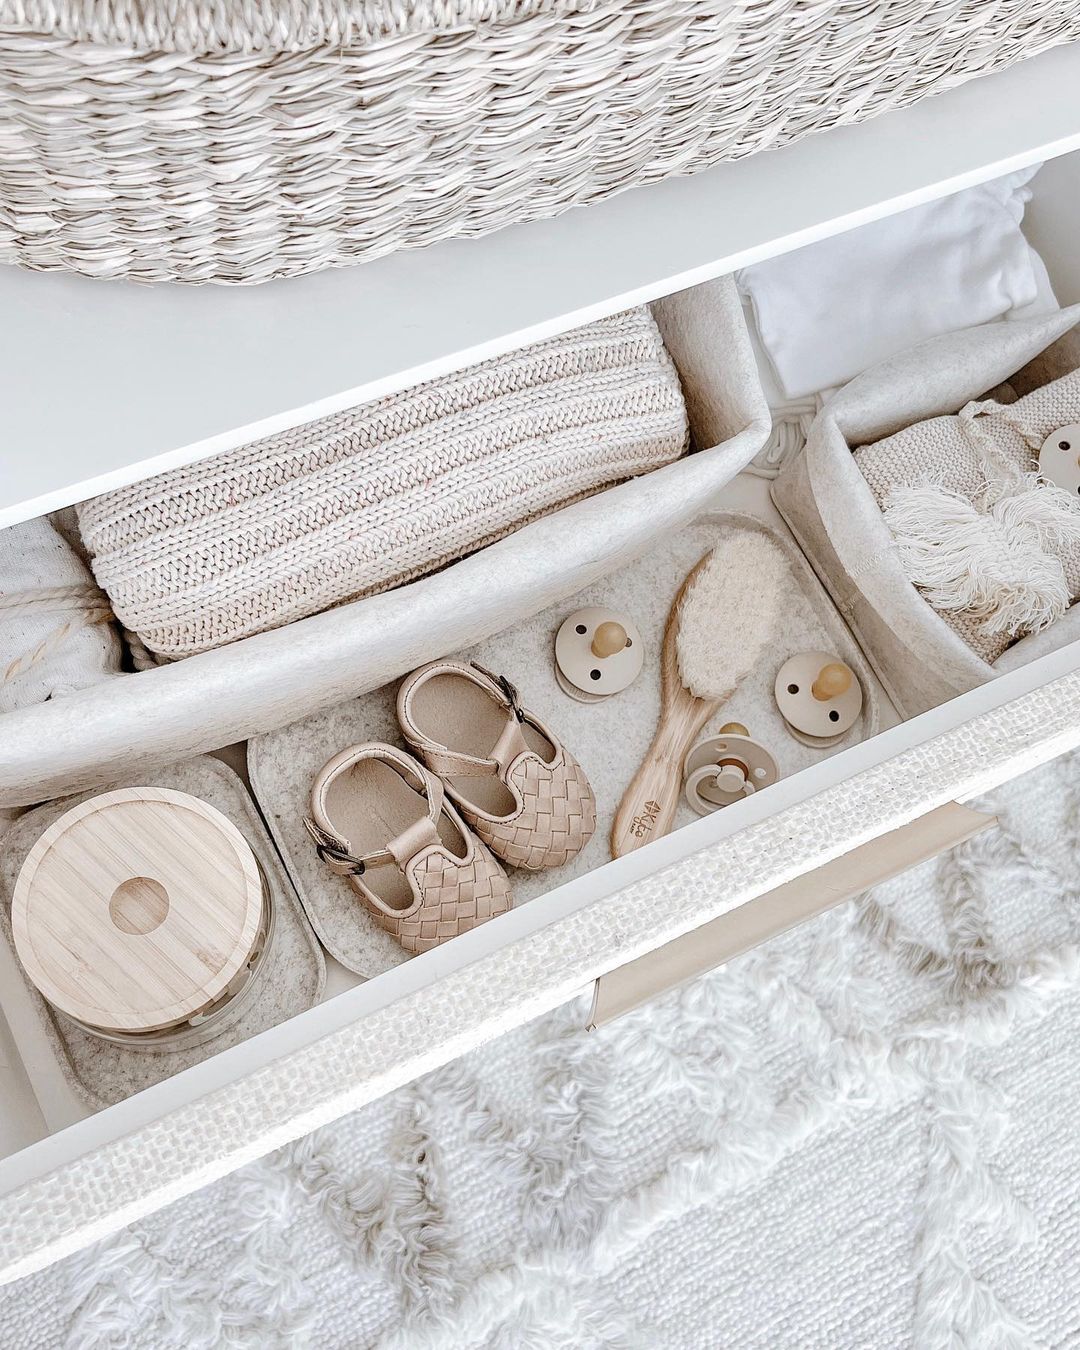 Baby Storage Ideas for Small Spaces - Organization Obsessed